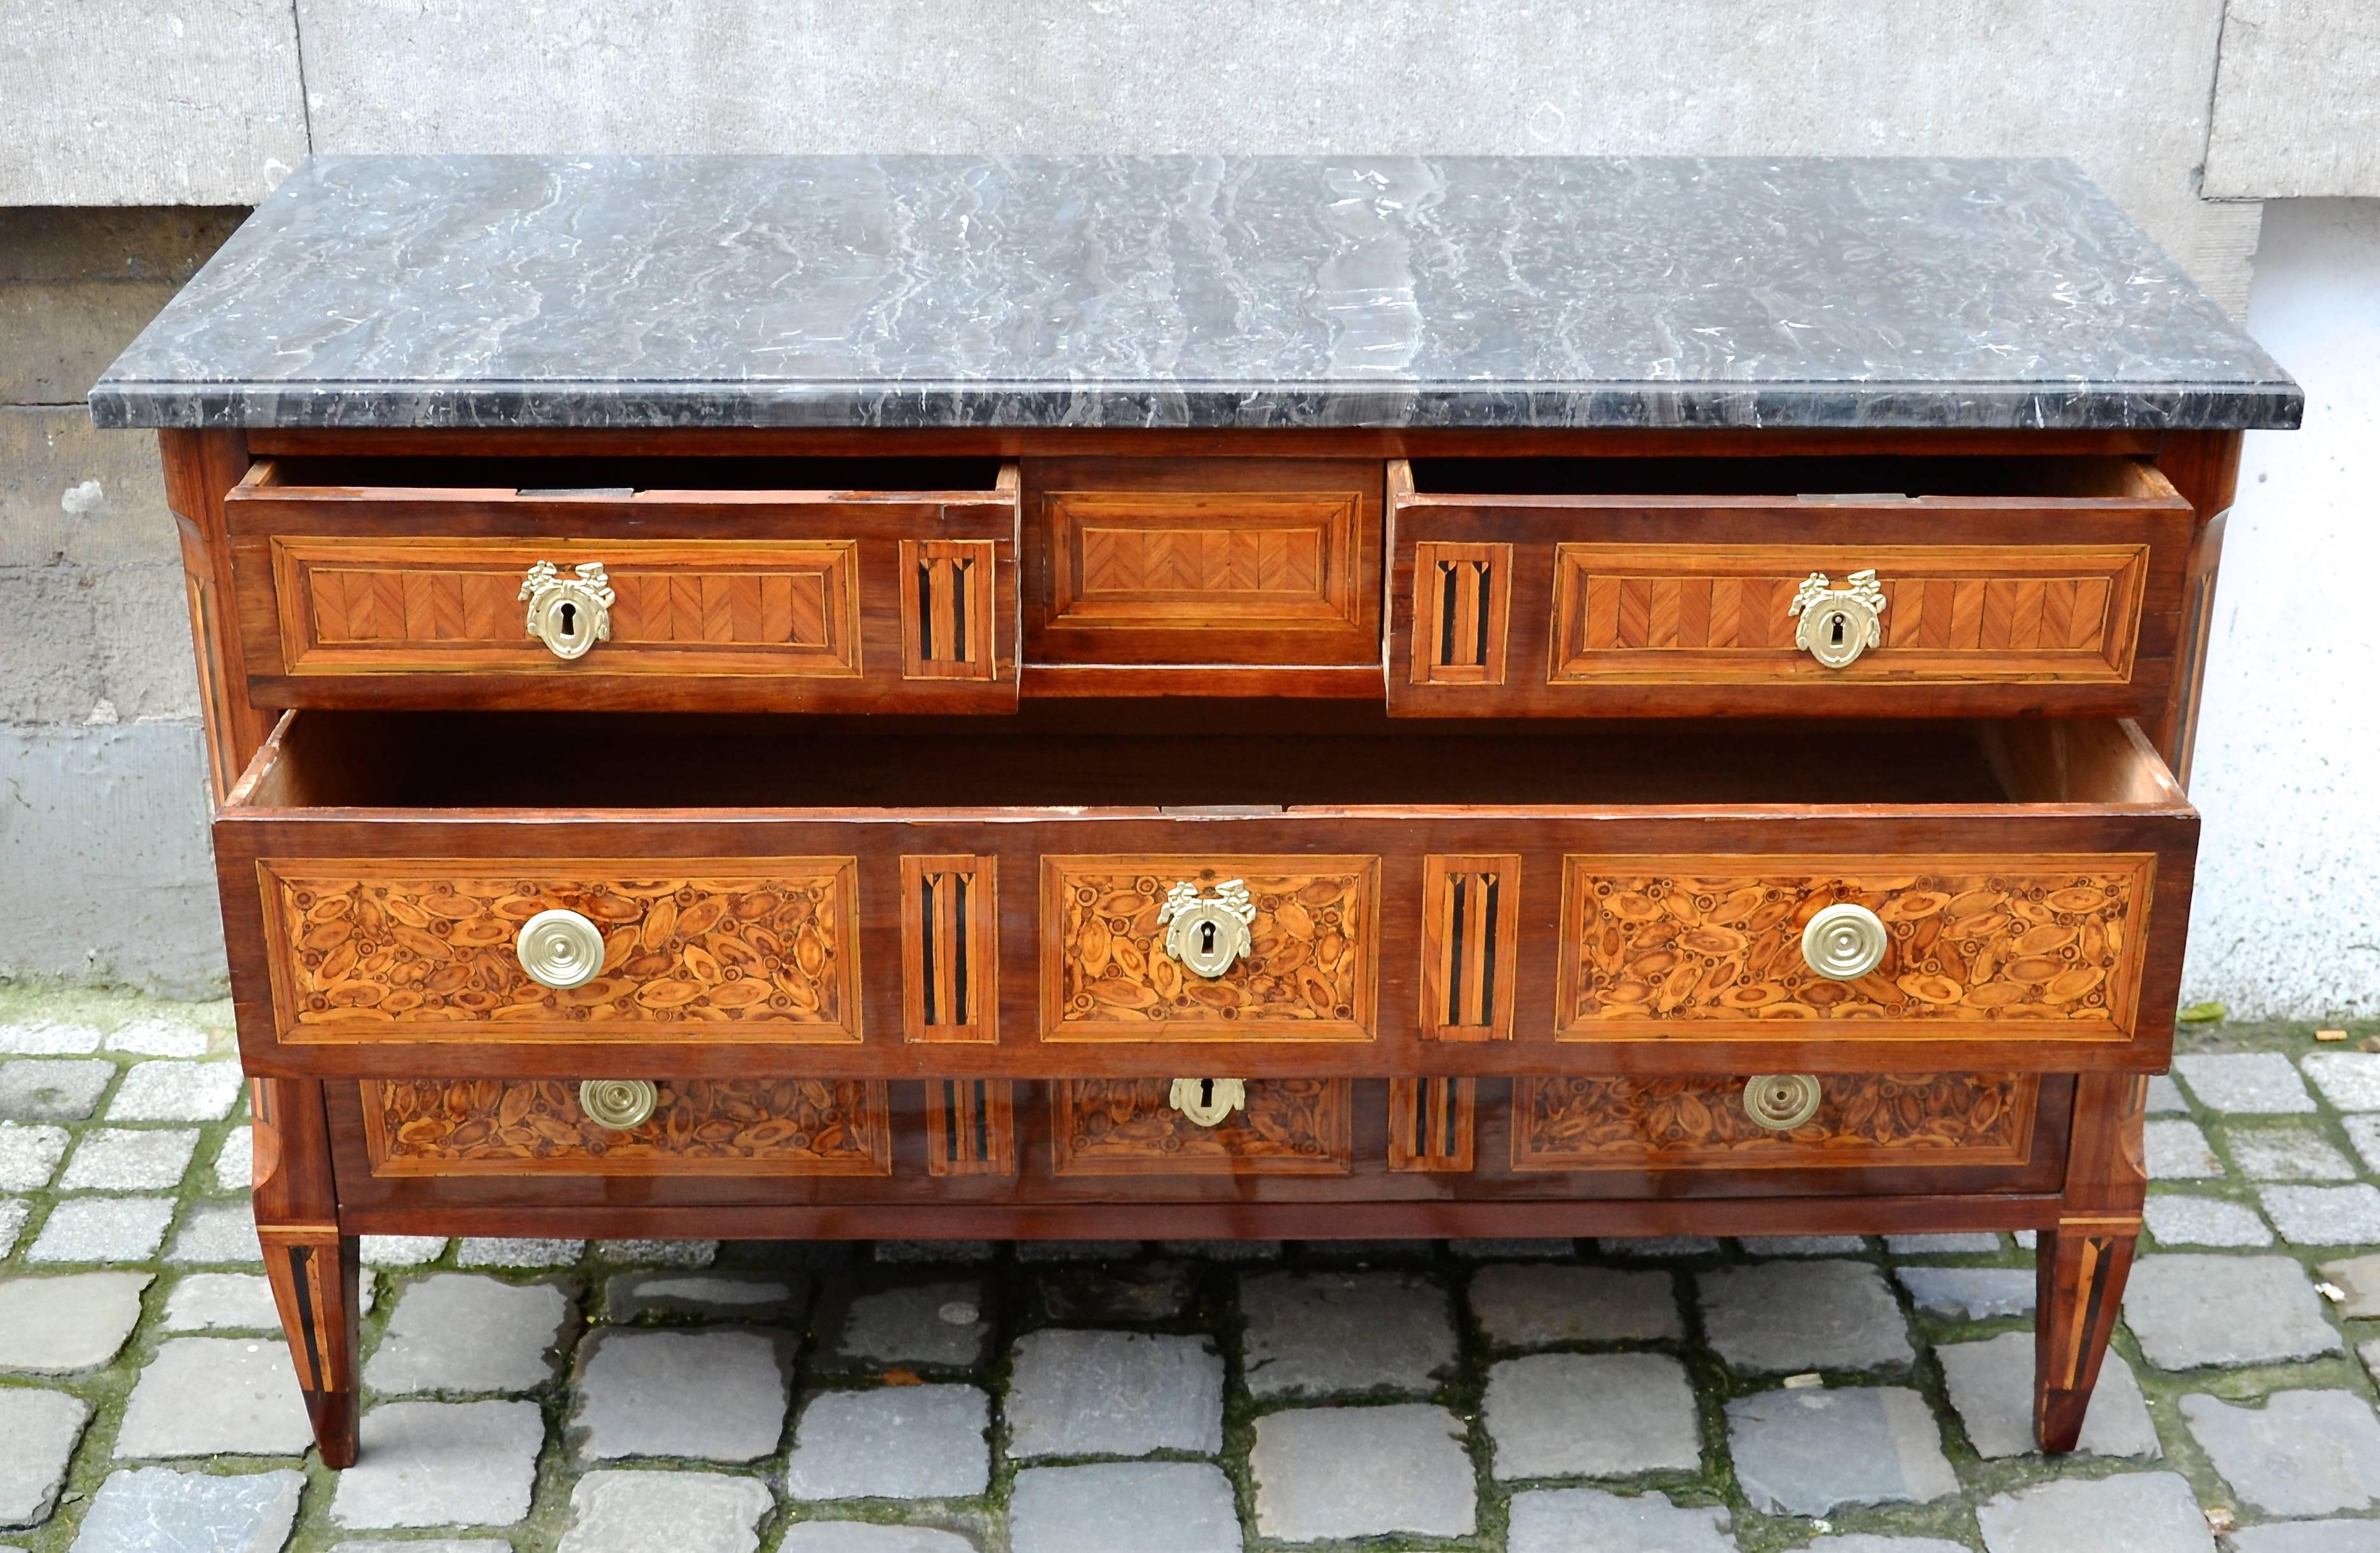 18th C. French marquetry chest of drawers - stamped J. Chastel
The marble has been replaced. New photos upcoming.